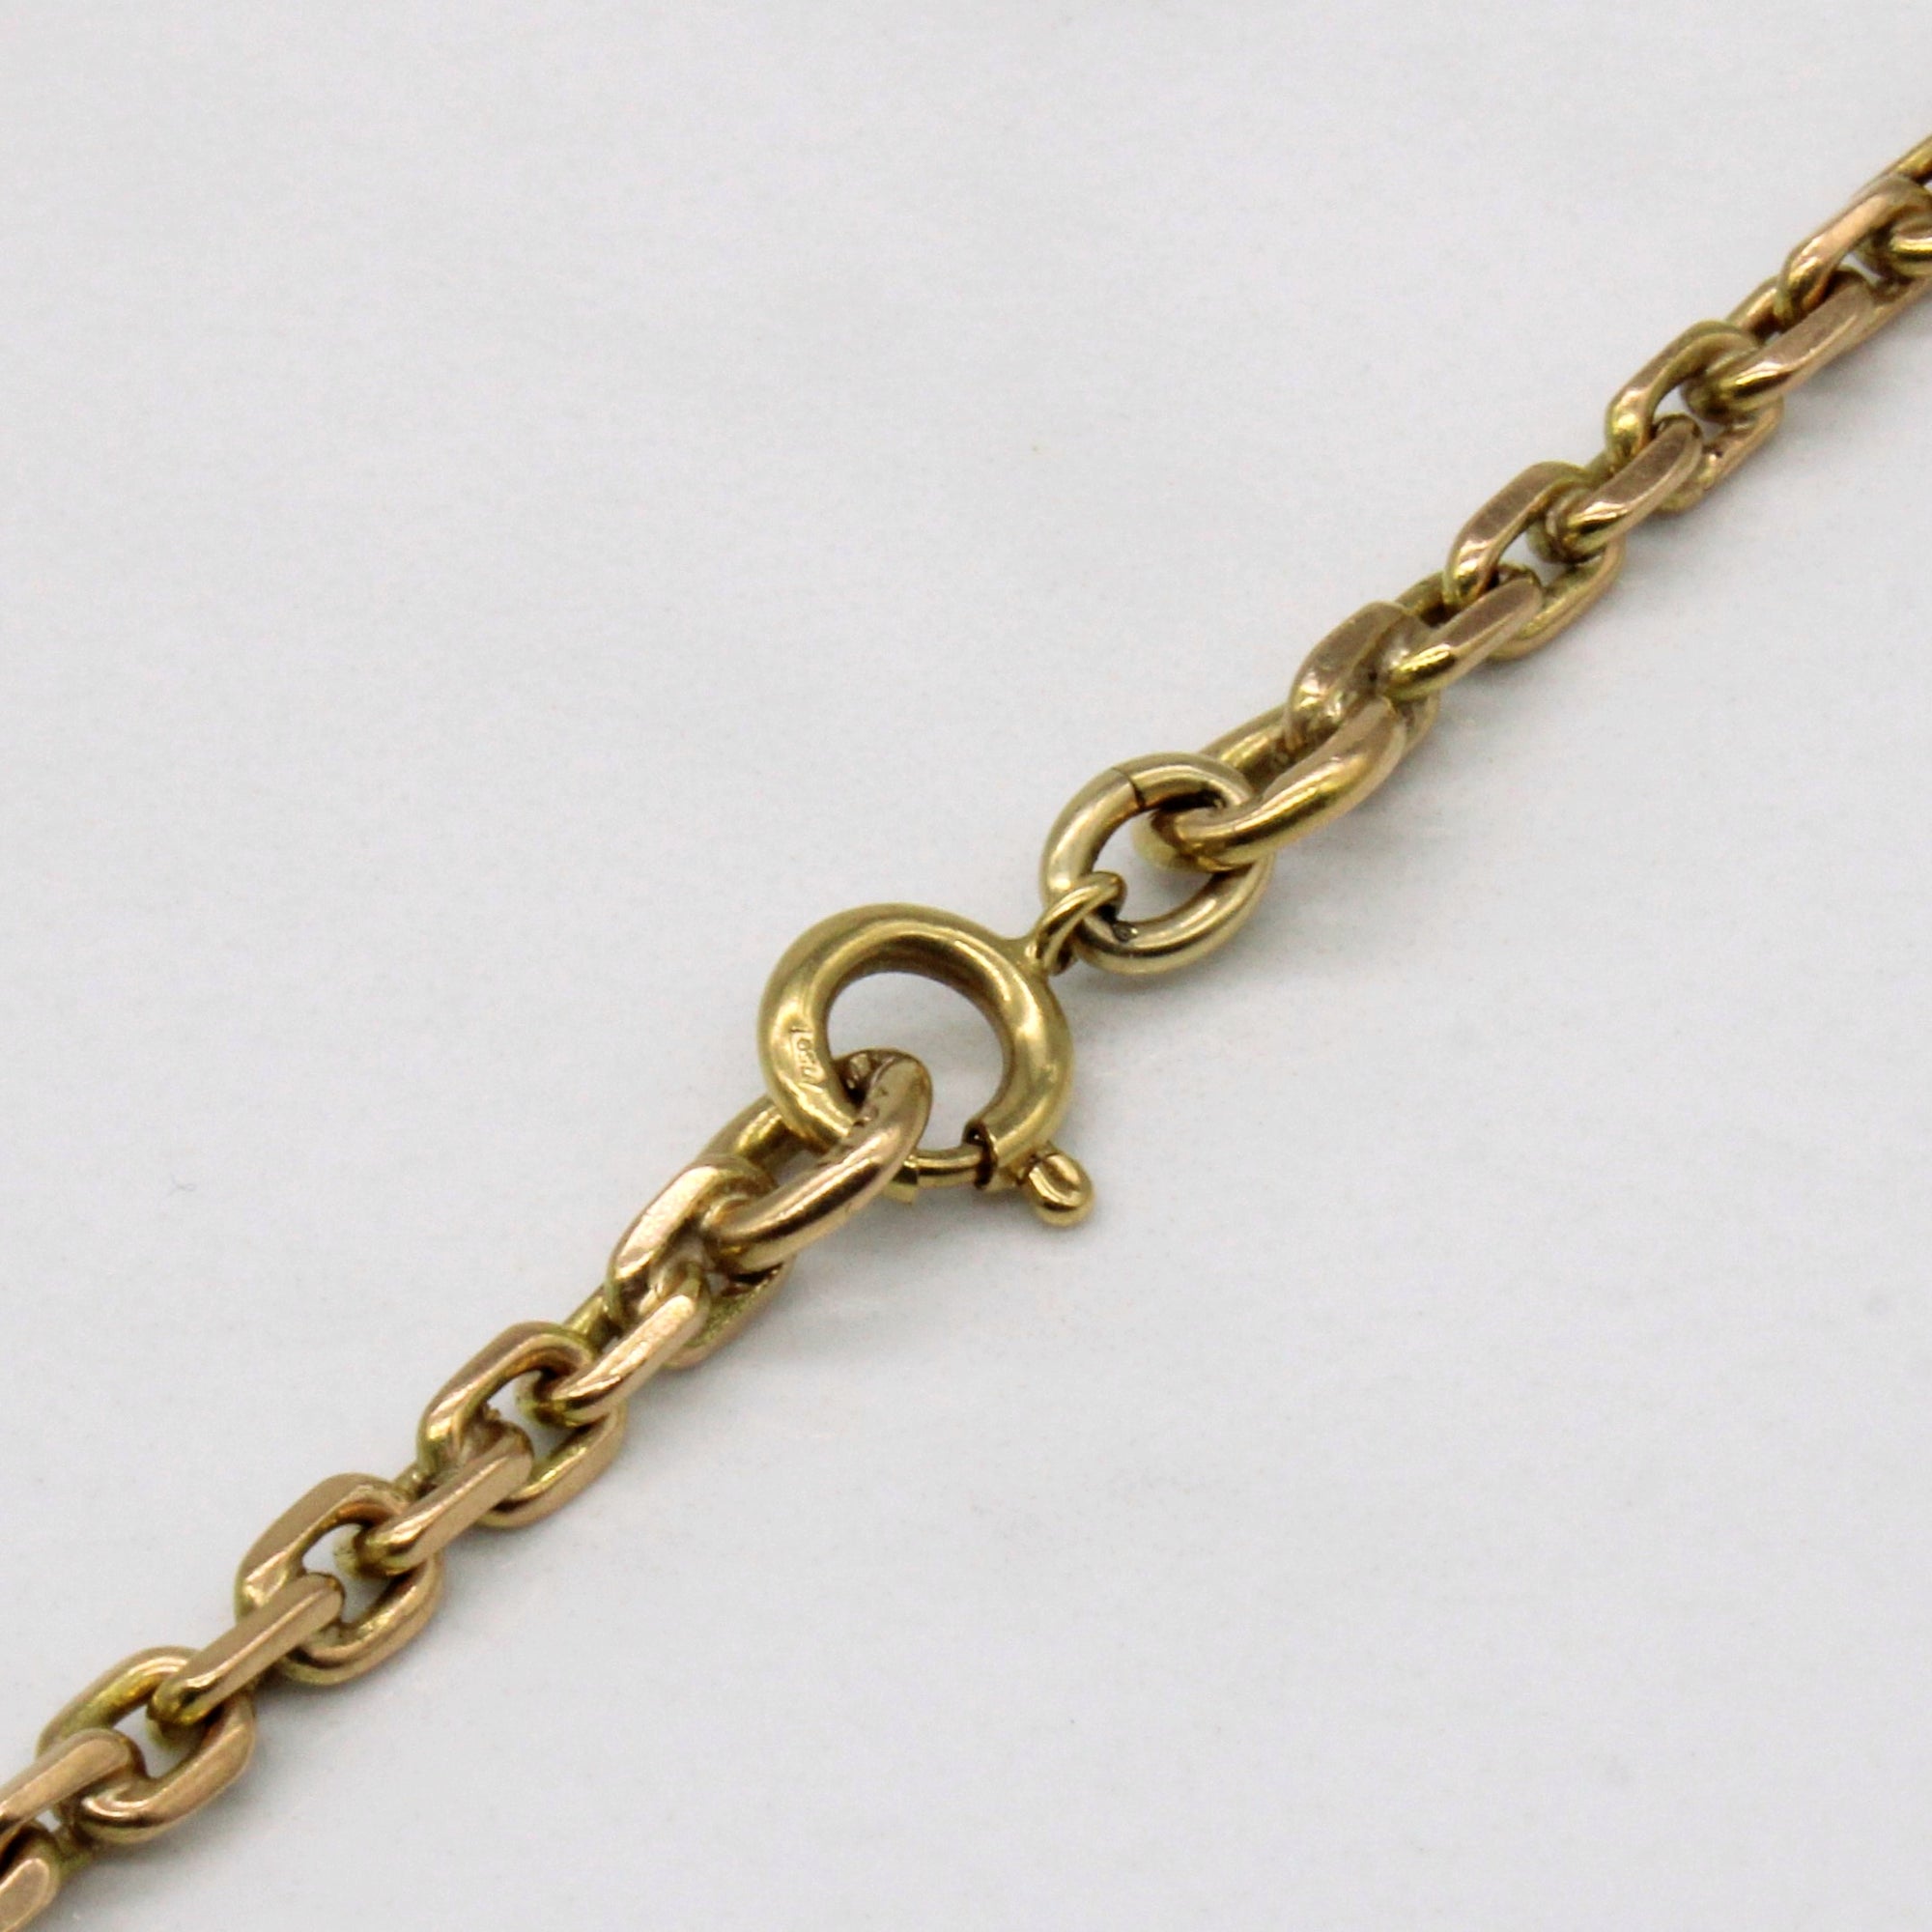 18k Yellow Gold Oval Link Chain | 24